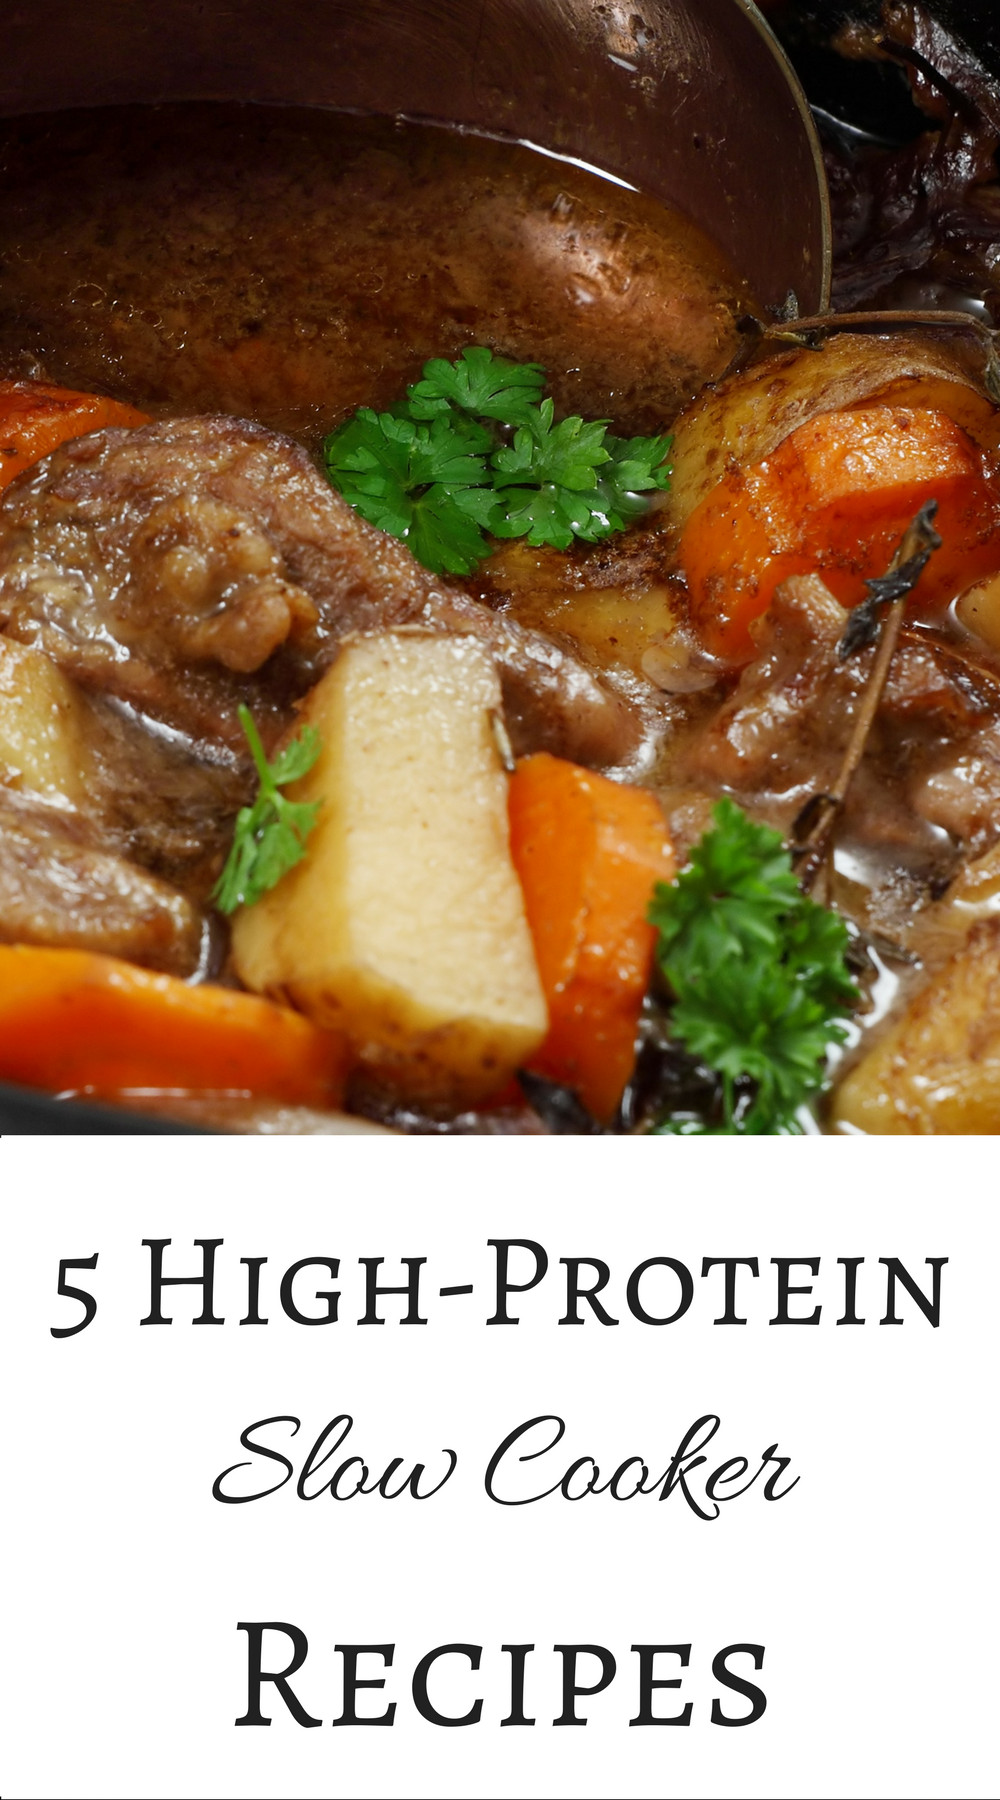 High Protein Low Carb Slow Cooker Recipes
 5 High Protein Slow Cooker Recipes You Should Eat For Low